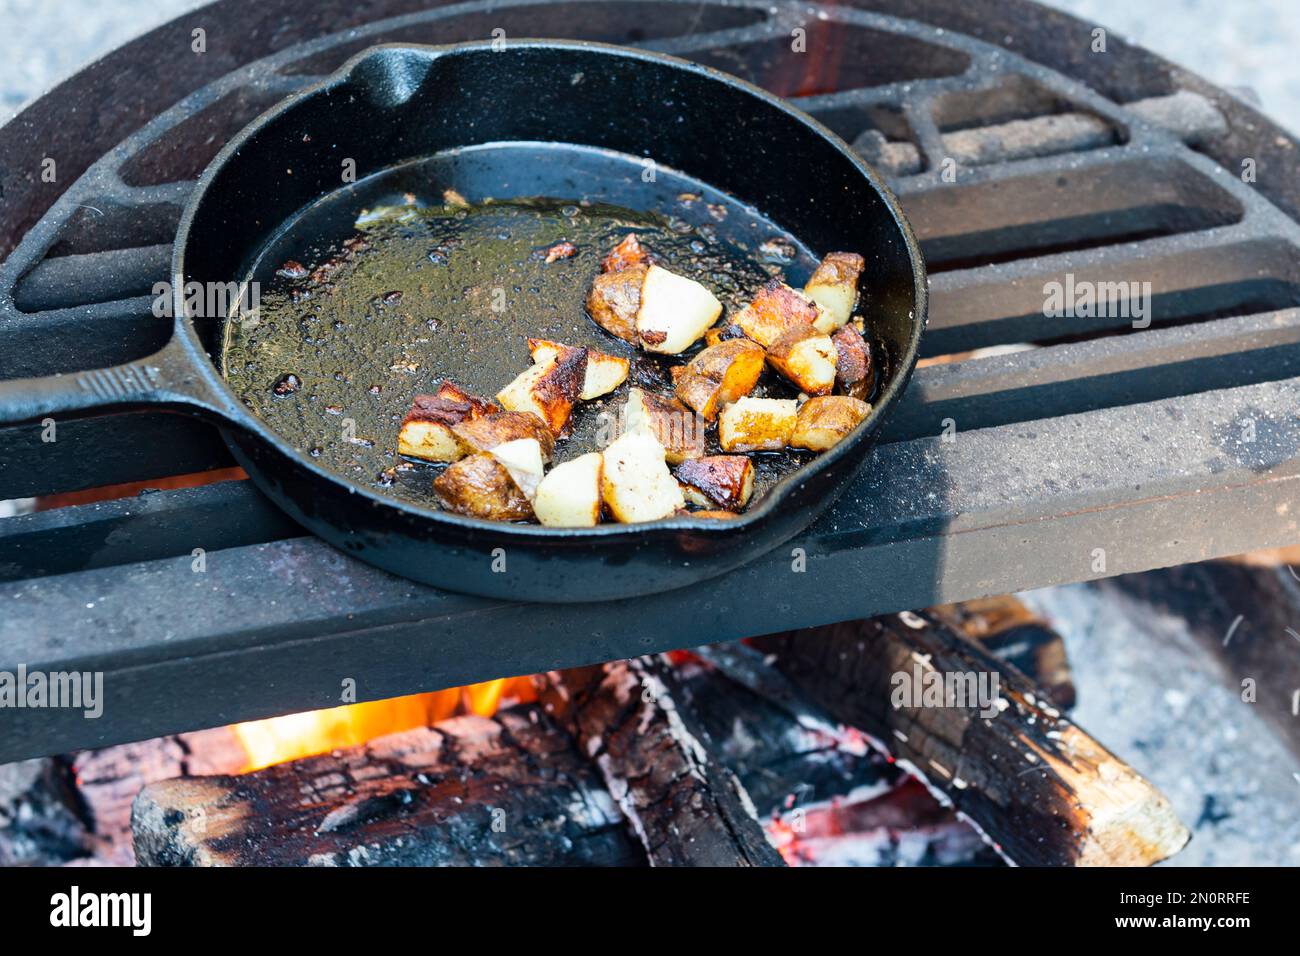 https://c8.alamy.com/comp/2N0RRFE/cooking-fried-potato-hashbrowns-in-a-cast-iron-skillet-over-a-campfire-2N0RRFE.jpg